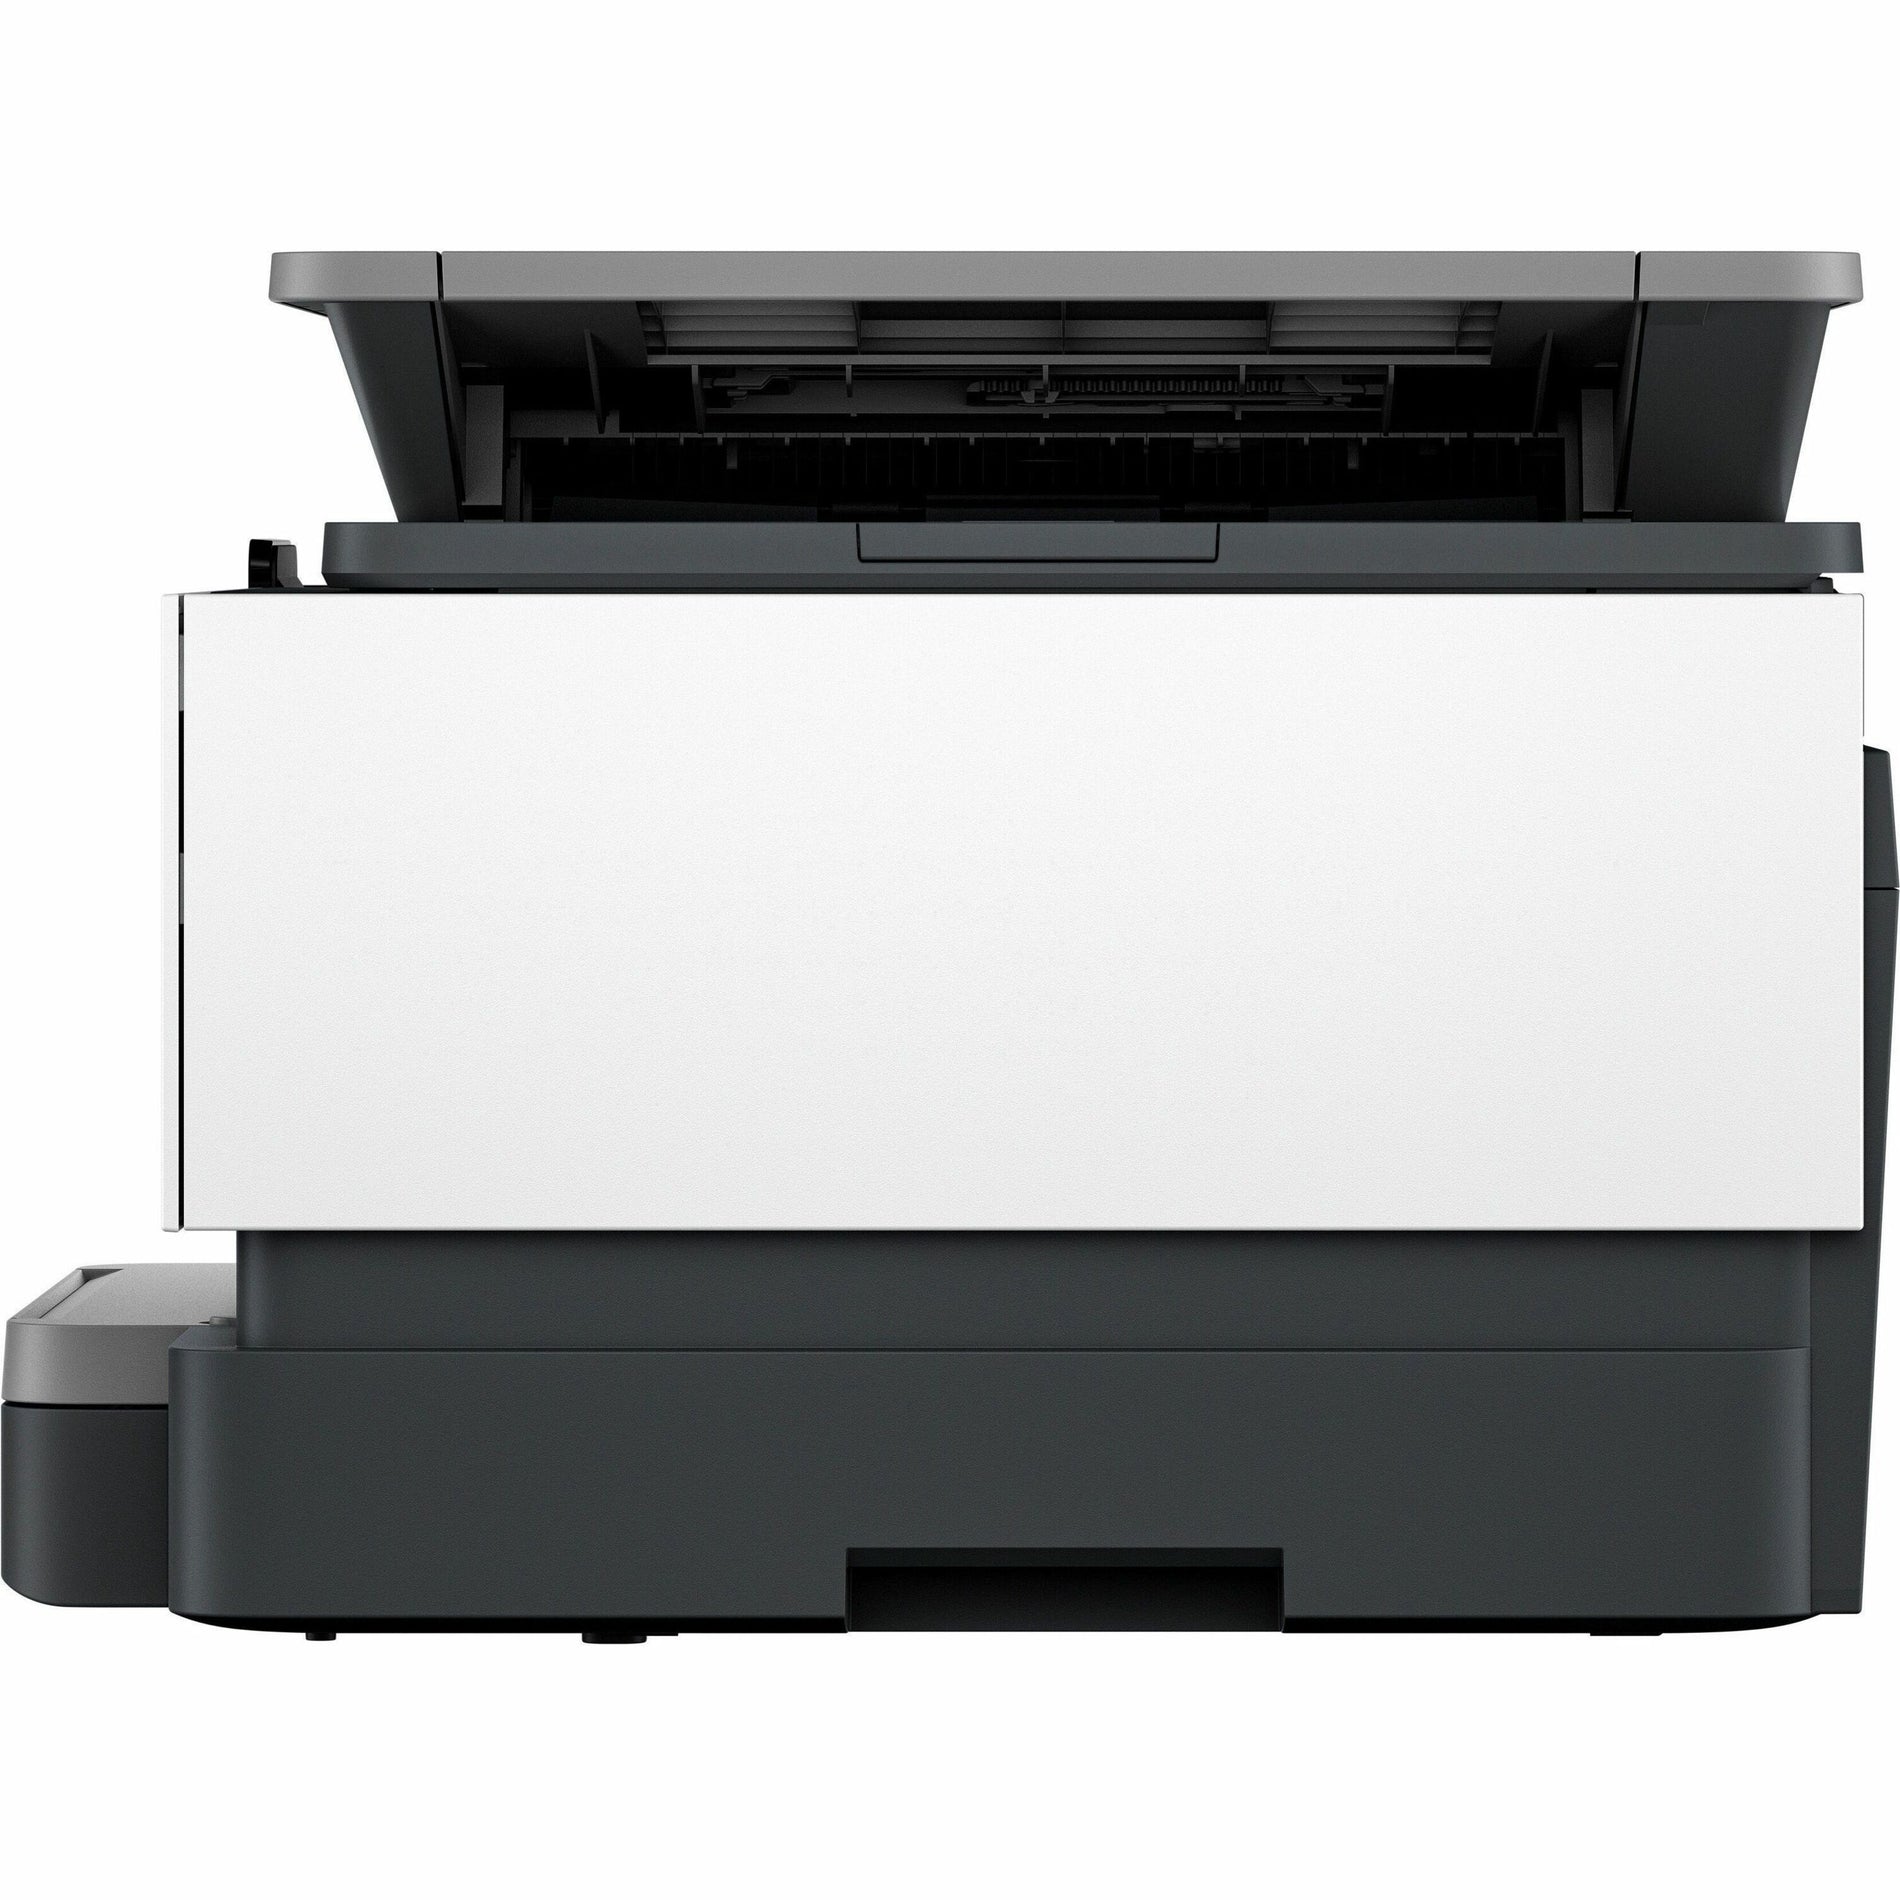 HP 403X0A#B1H OfficeJet Pro 9125e Inkjet Multifunction Printer, All-in-One Printer with Touchscreen and Wireless Printing